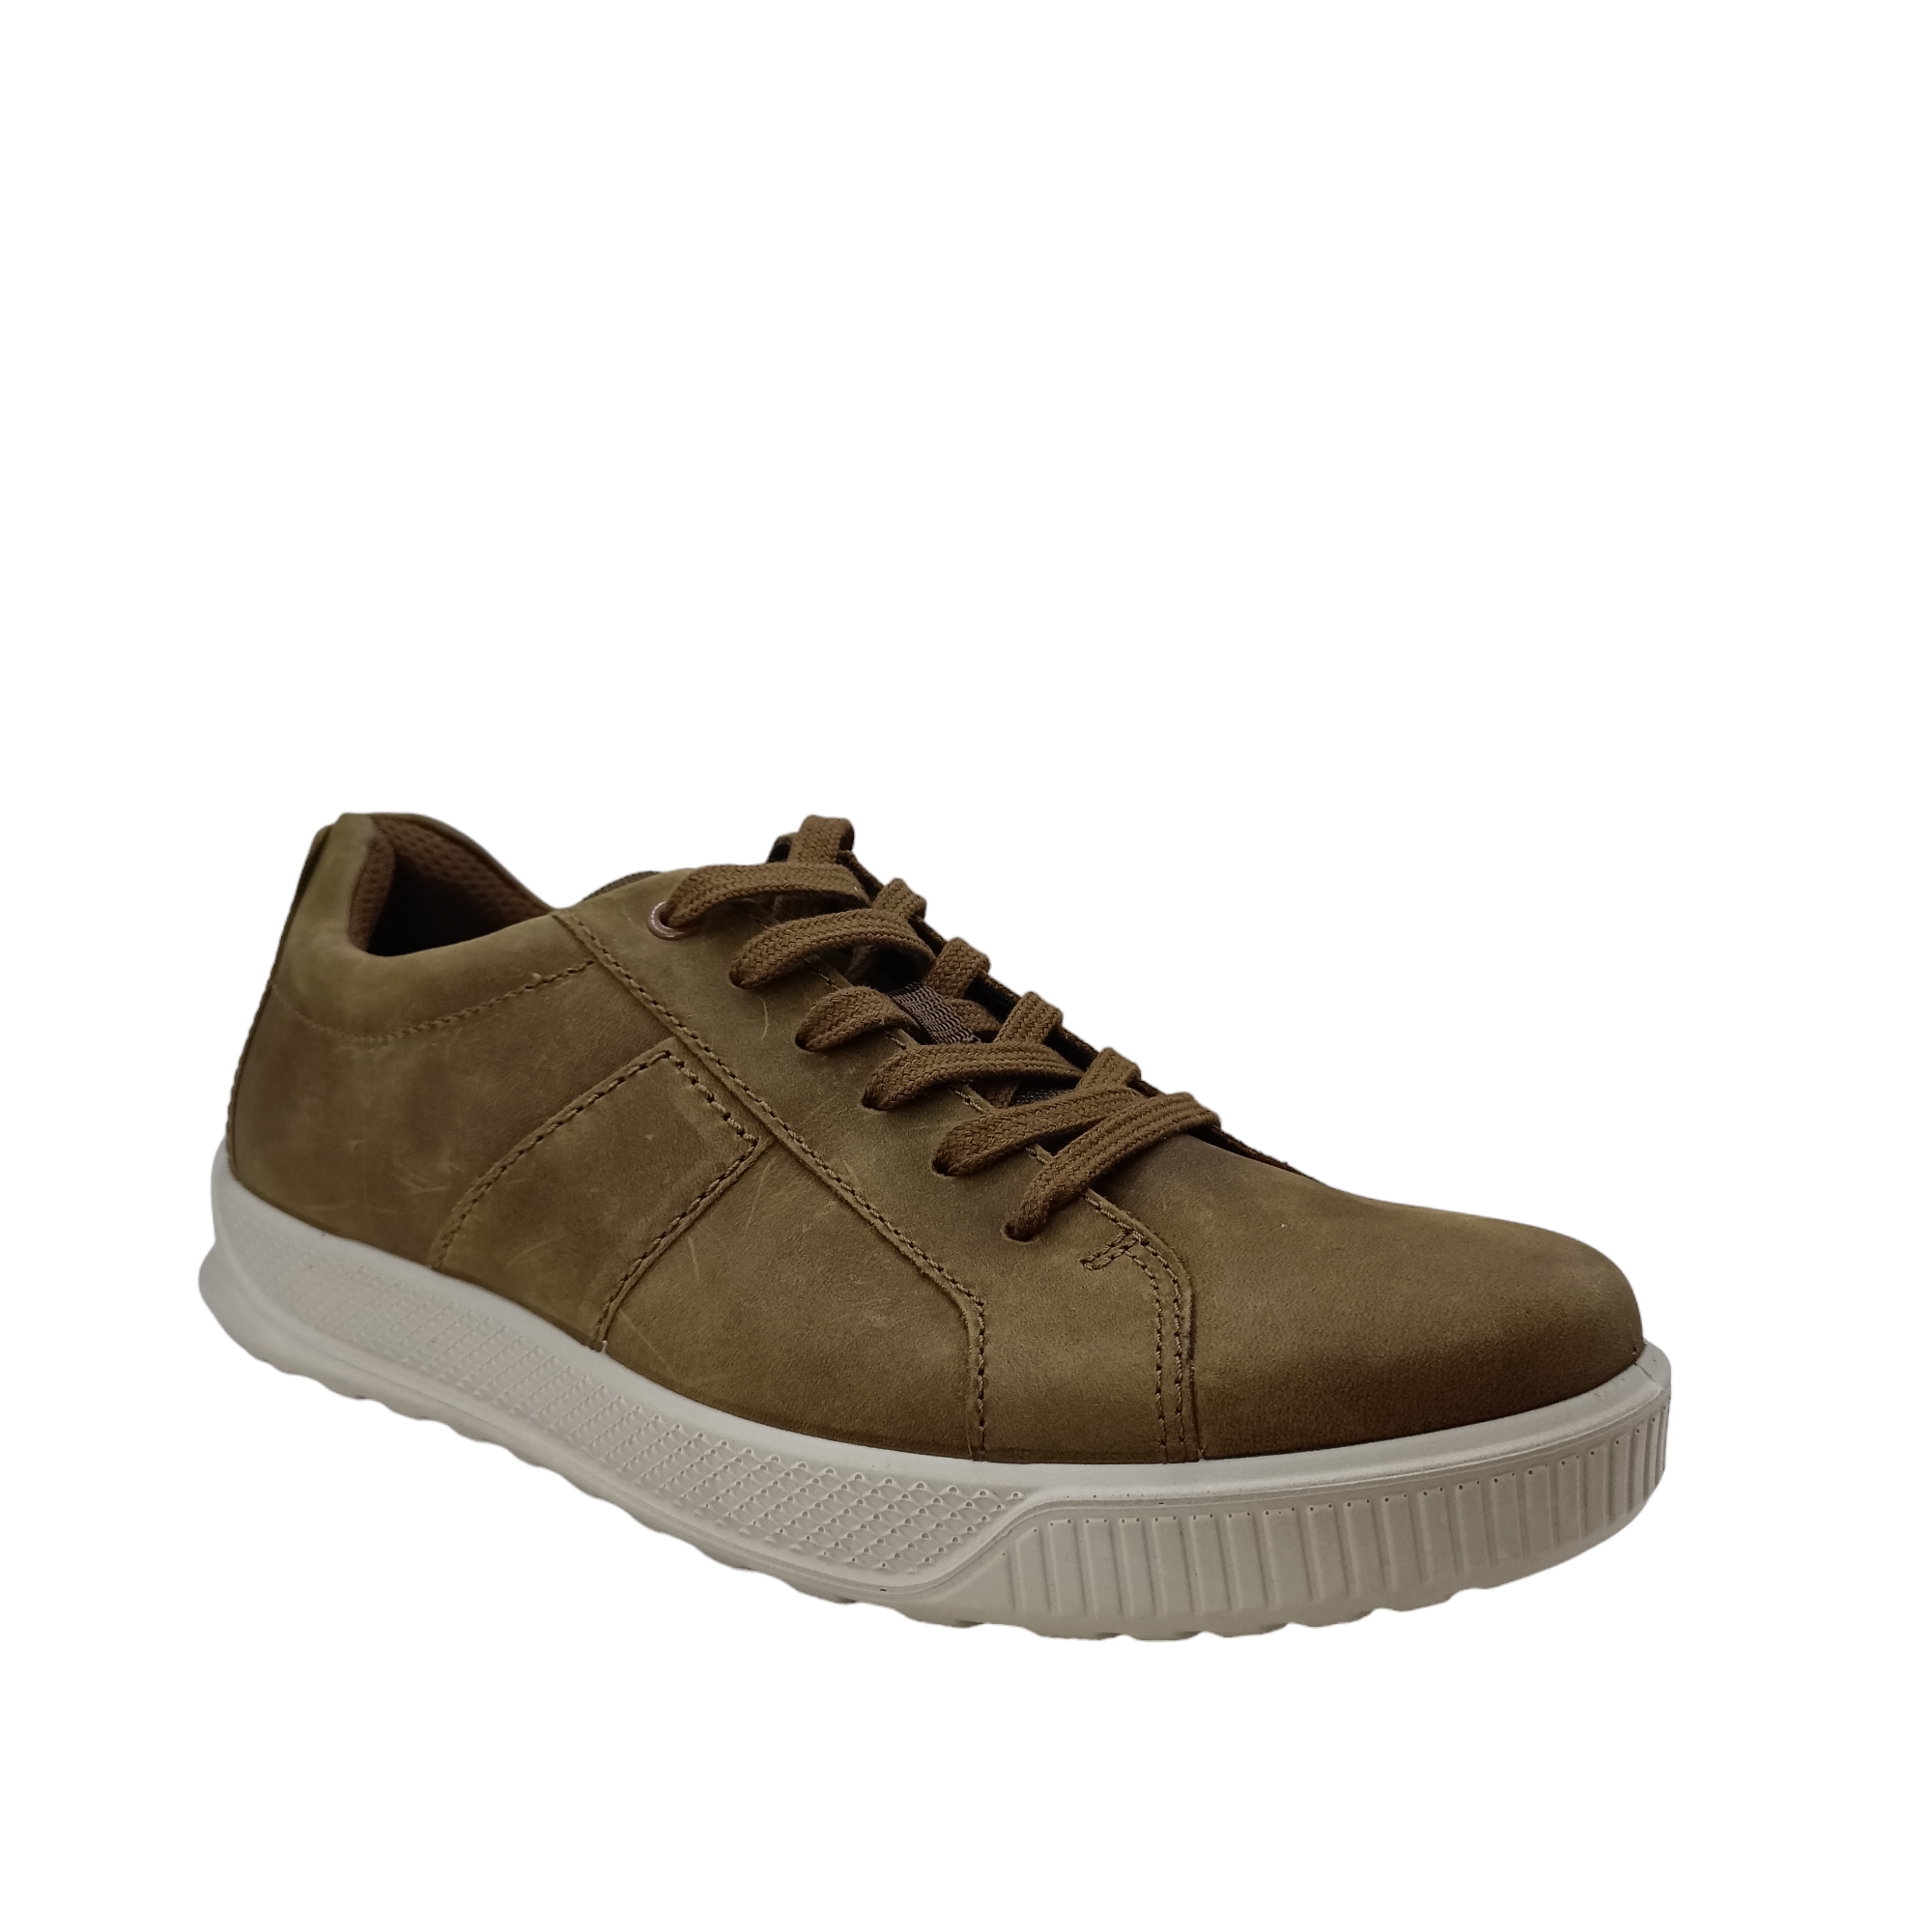 Shop Byway M - with shoe&amp;me - from Ecco - Sneakers - Mens, Shoe, Sneakers, Winter